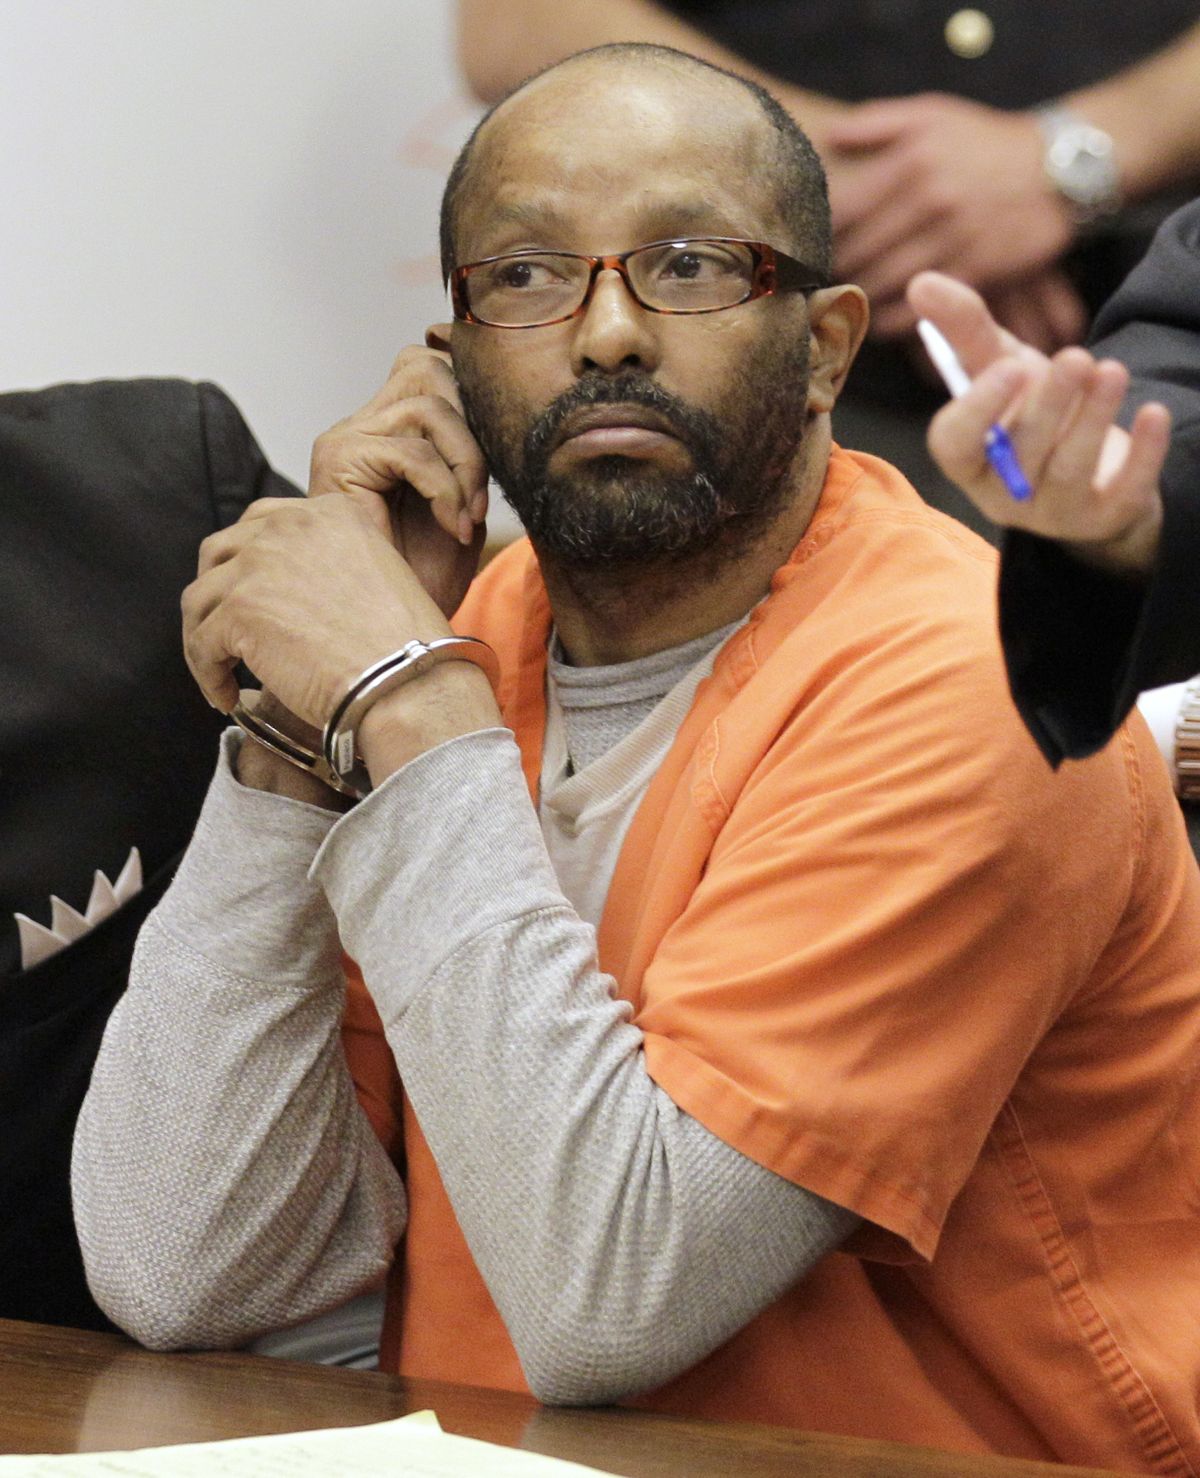 In this May 10, 2011 photo, Anthony Sowell appears in court in Cleveland. Sowell, an Ohio man sentenced to death for killing 11 women and hiding their remains in and around his home has died in prison. The state Corrections Department says the 61-year-old convicted serial killer was receiving end-of-life care at Franklin Medical Center for a terminal illness when he died Monday, Feb. 8, 2021.  (Amy Sancetta)